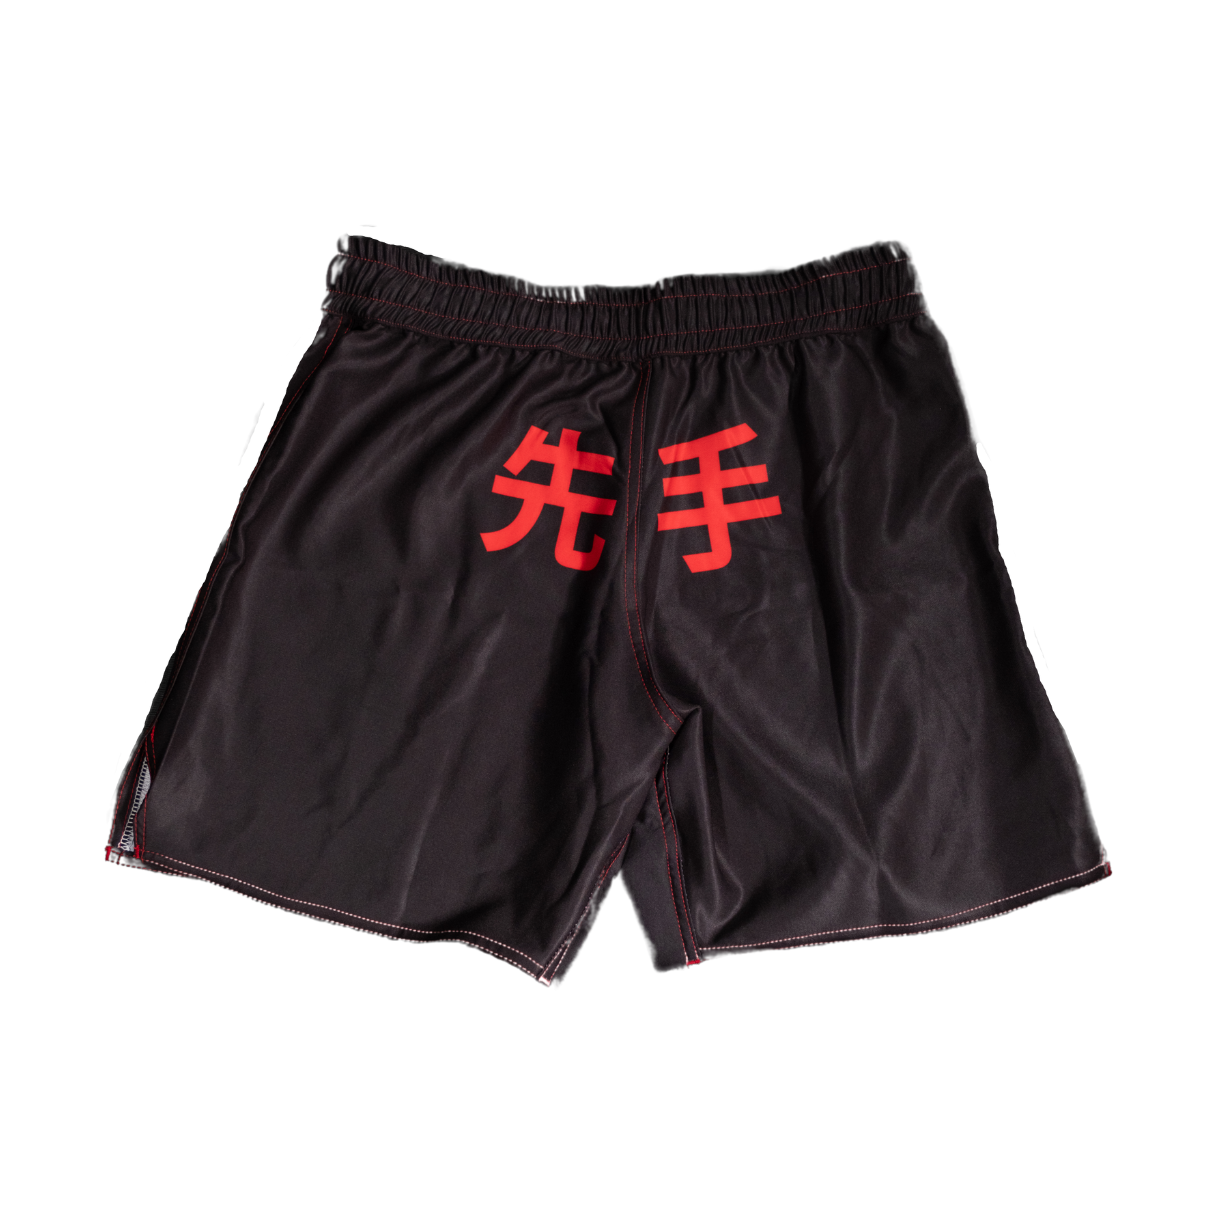 Initiate with Sente - Obsidian Shorts